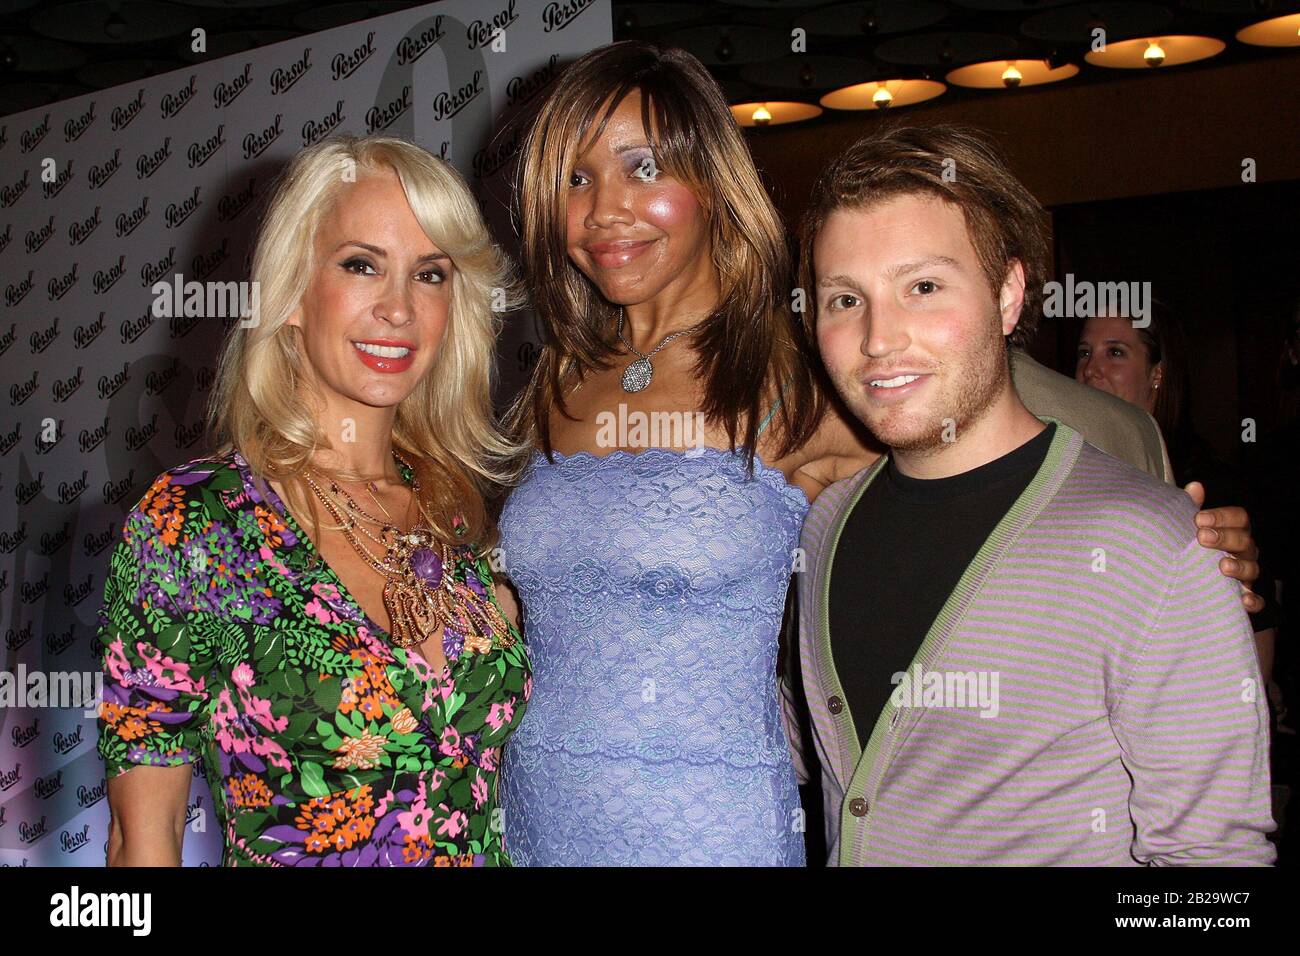 New York, NY, USA. 23 June, 2009. Tracy Stern, Tia Walker, David Chines at the Persol 'Incognito Design' exhibition opening at The Whitney Museum of American. Credit: Steve Mack/Alamy Stock Photo